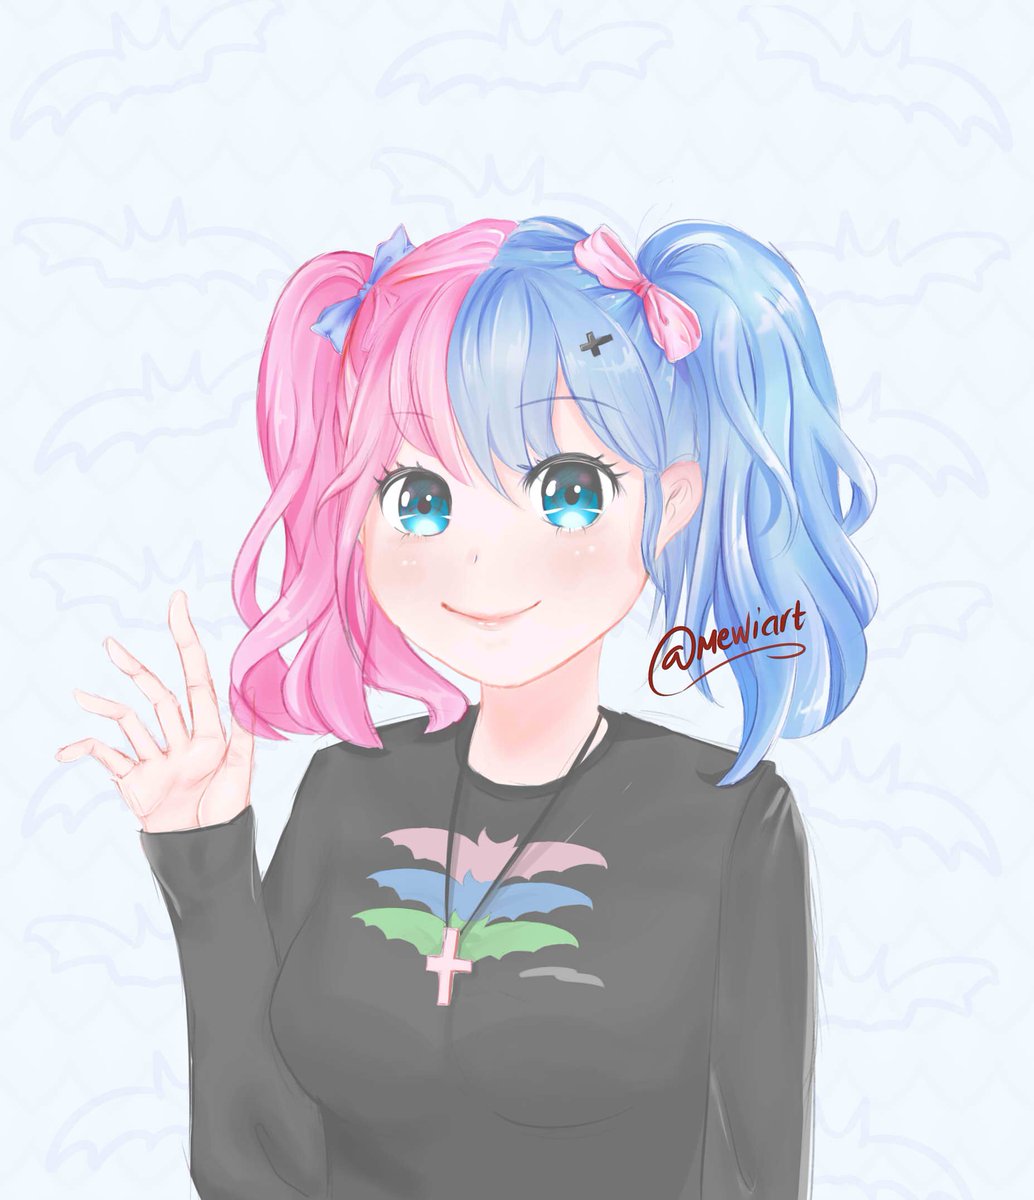 Anime girl with multi color hair